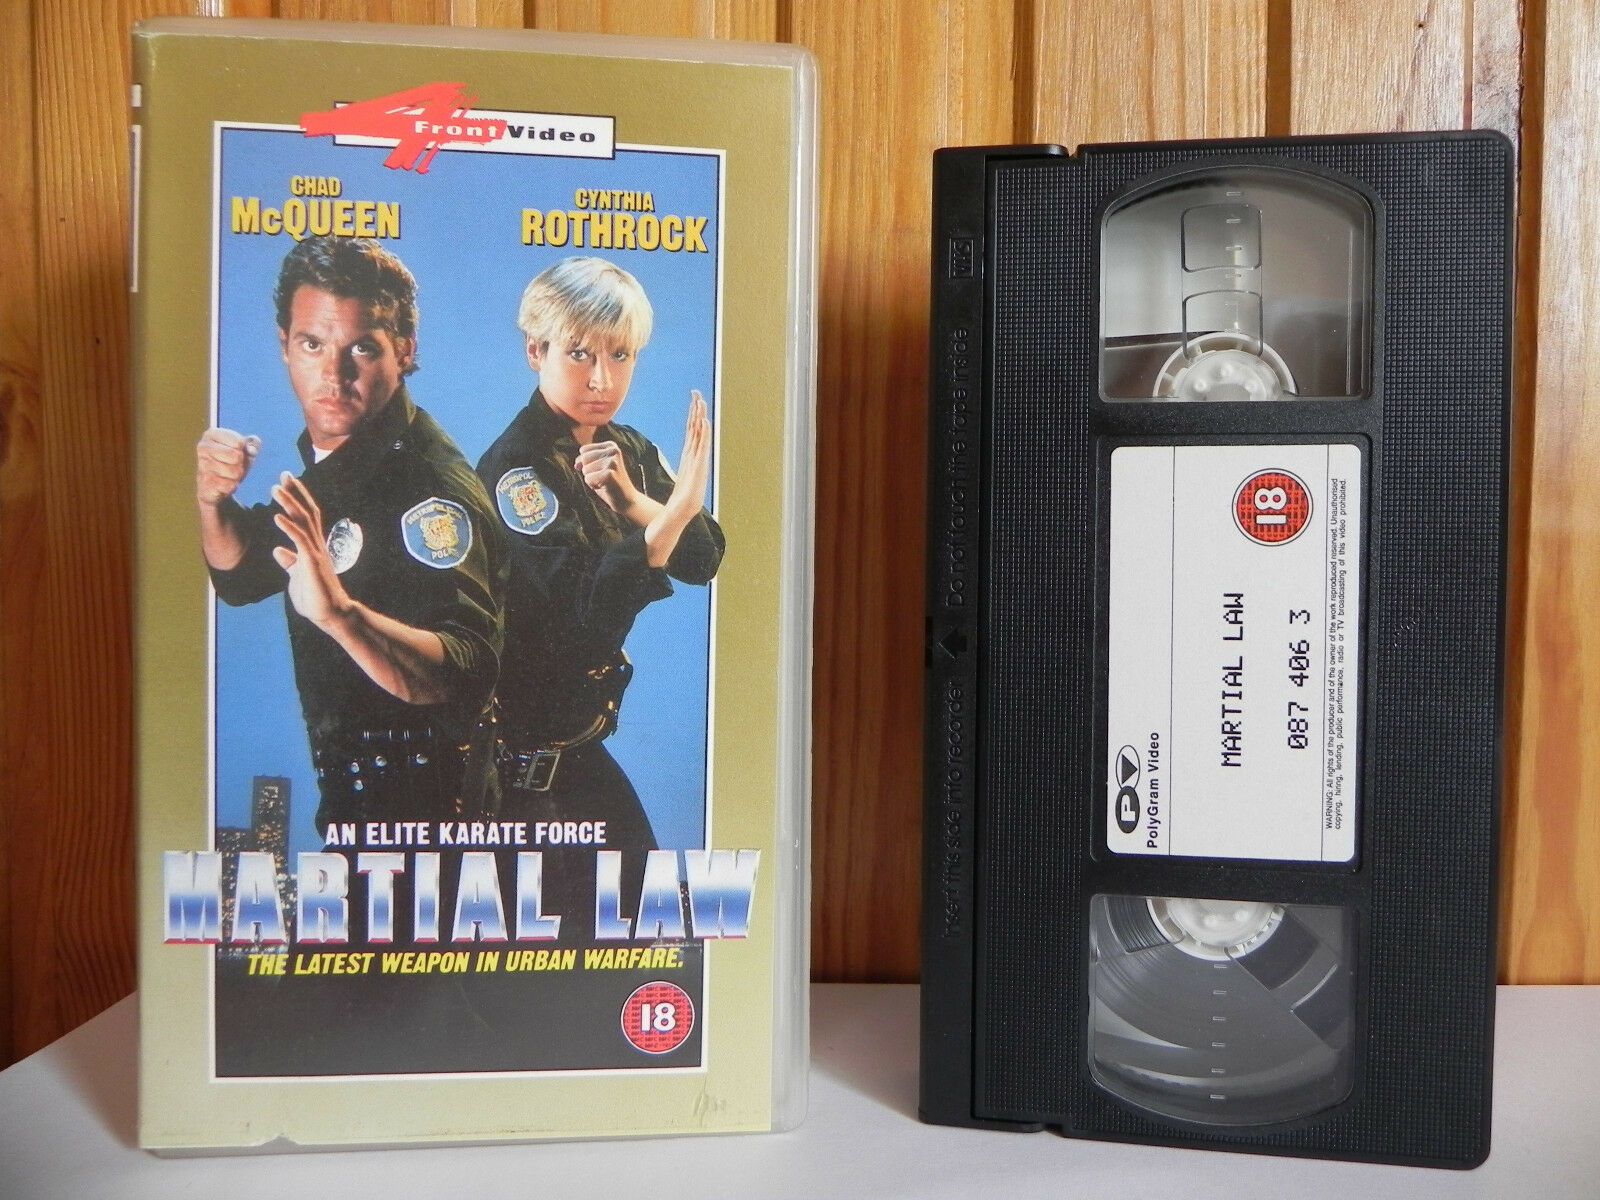 Martial Law - 4 Front - Martial Arts - Chad McQueen - Cynthia Rothrock - VHS-